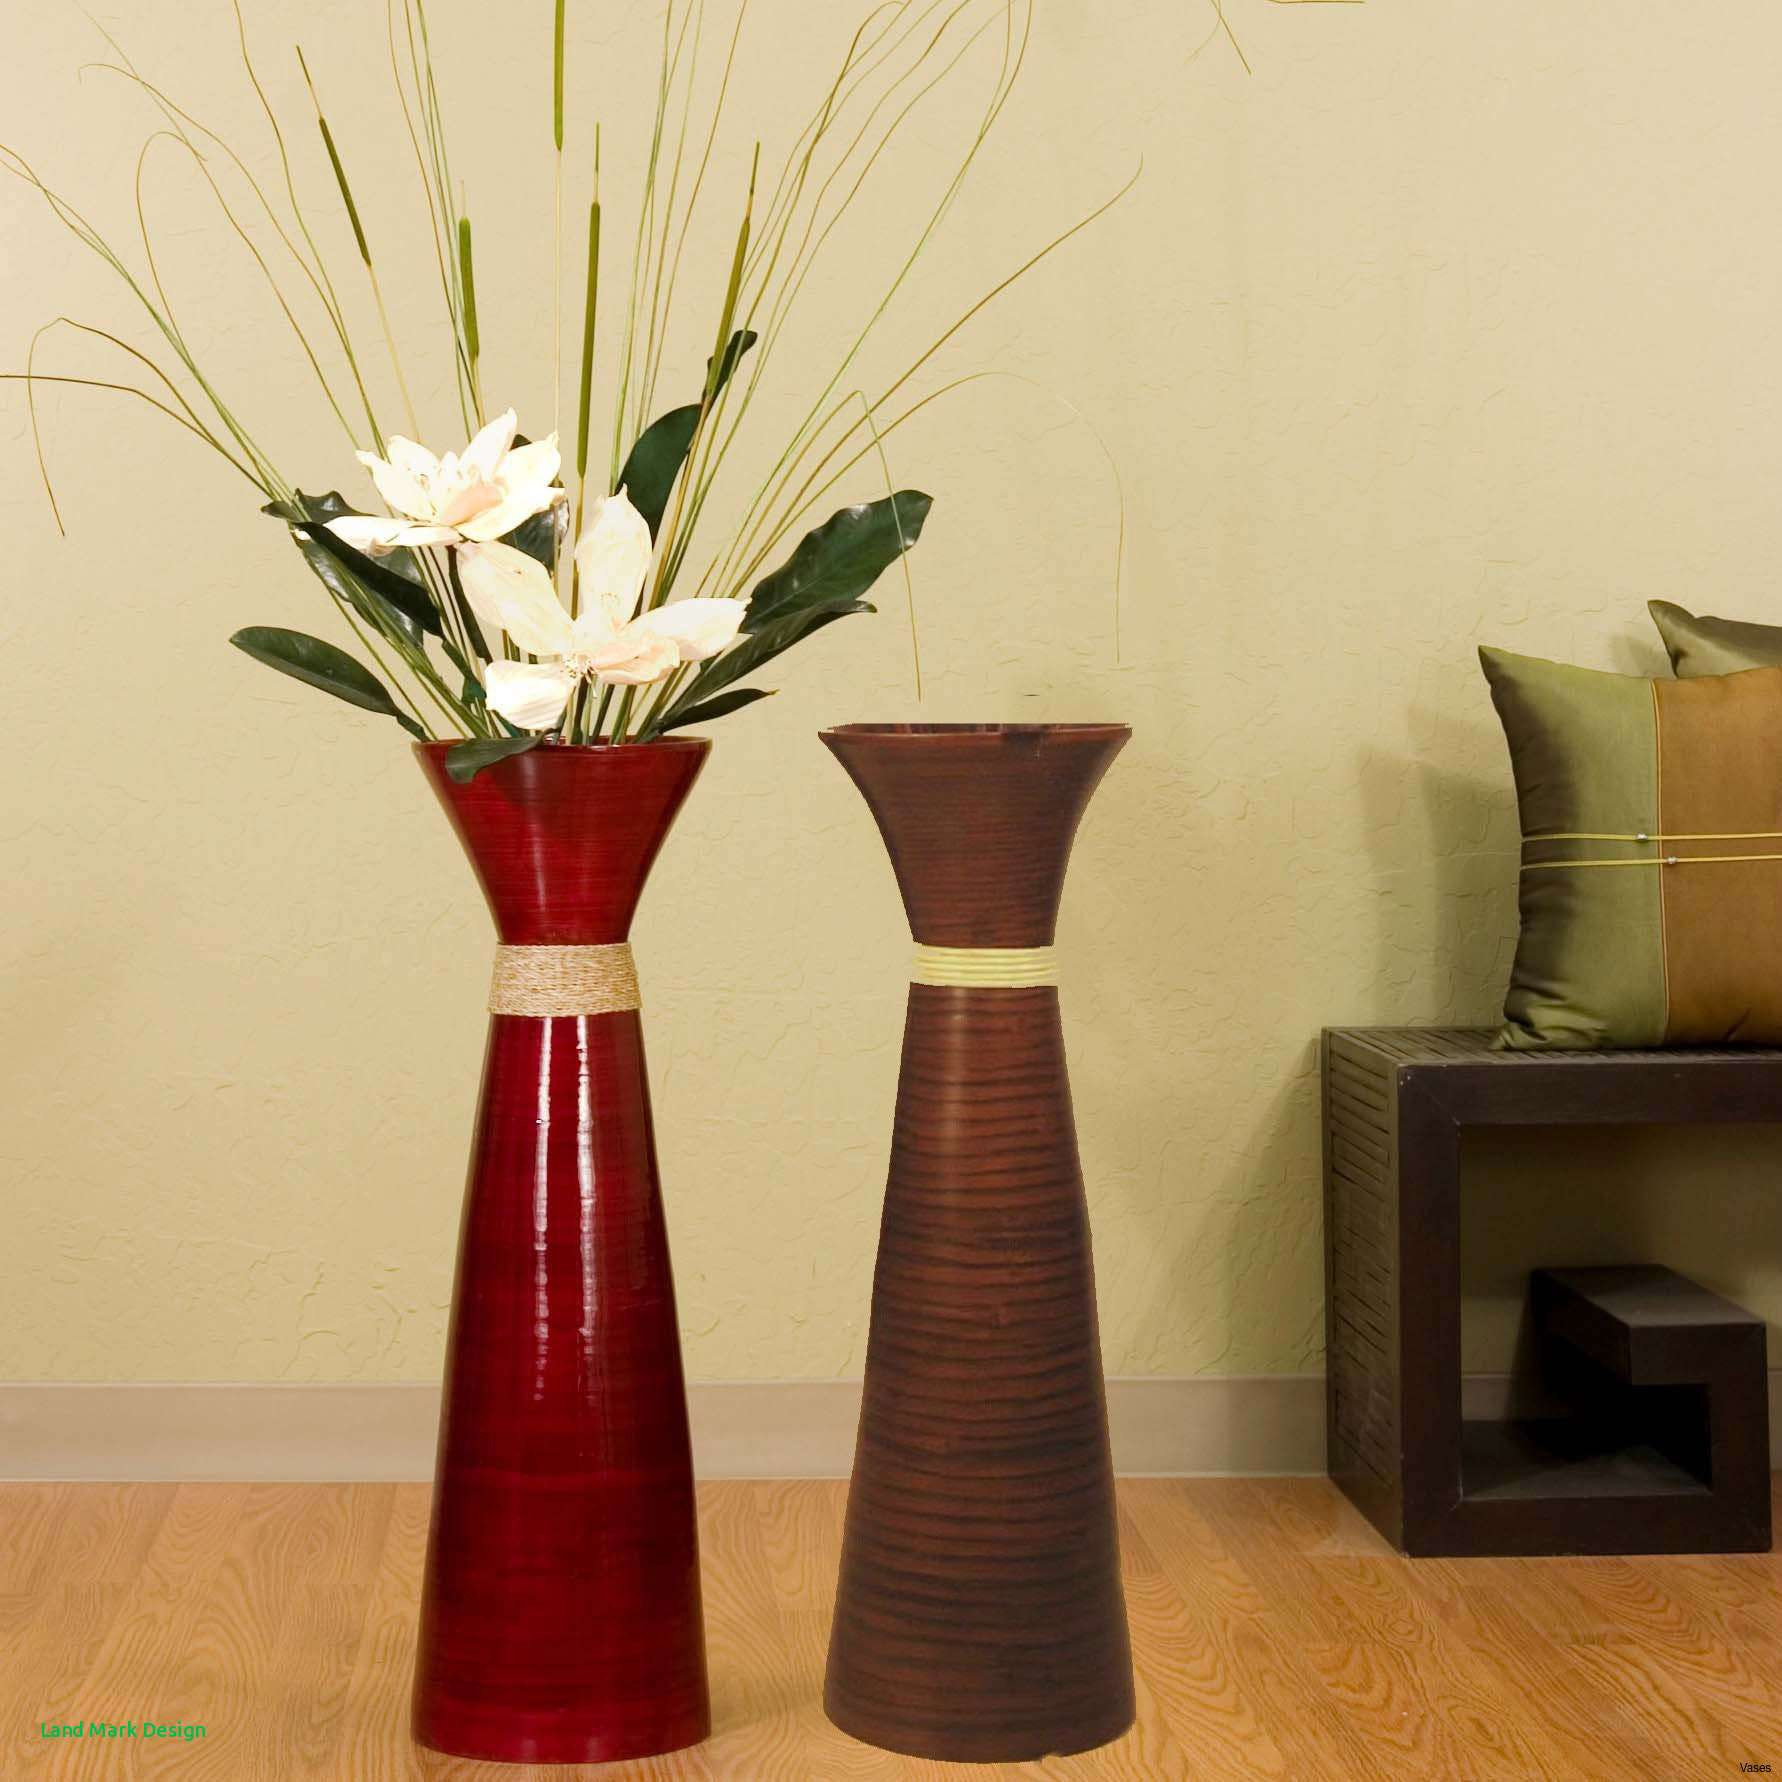 18 Nice Standing Vases for Living Room 2024 free download standing vases for living room of floor vases decoration ideas design home design pertaining to floor vase colorsh vases red decorative image of colorsi 0d